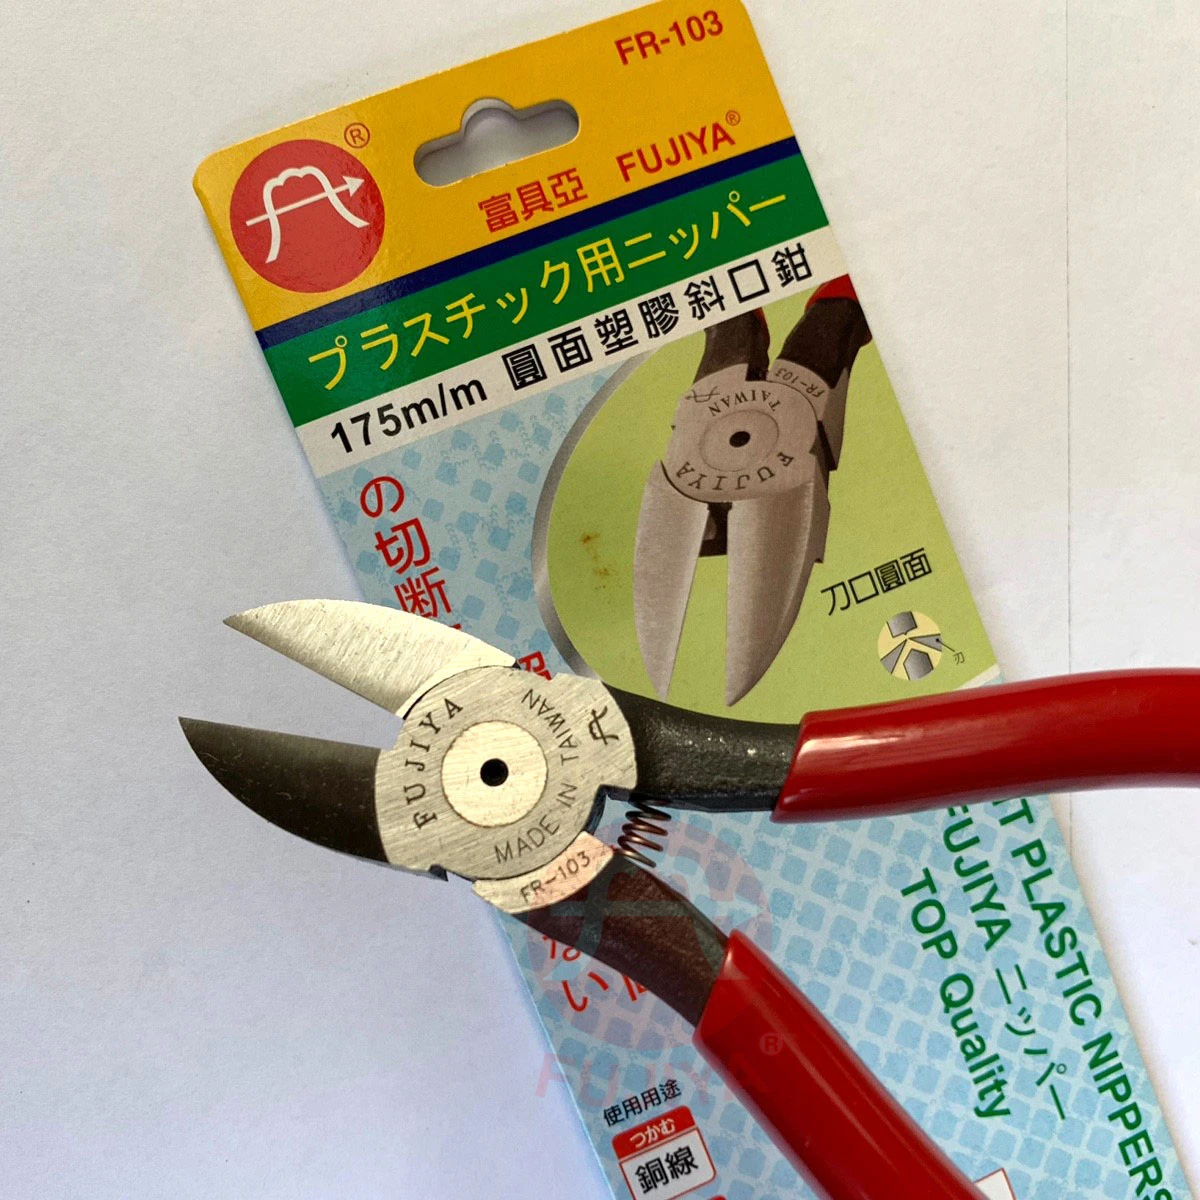 Plastic Diagonal Round Side Pliers for Cutting l S55C high carbon alloy steel l Polished round surface l PVC coating handle l